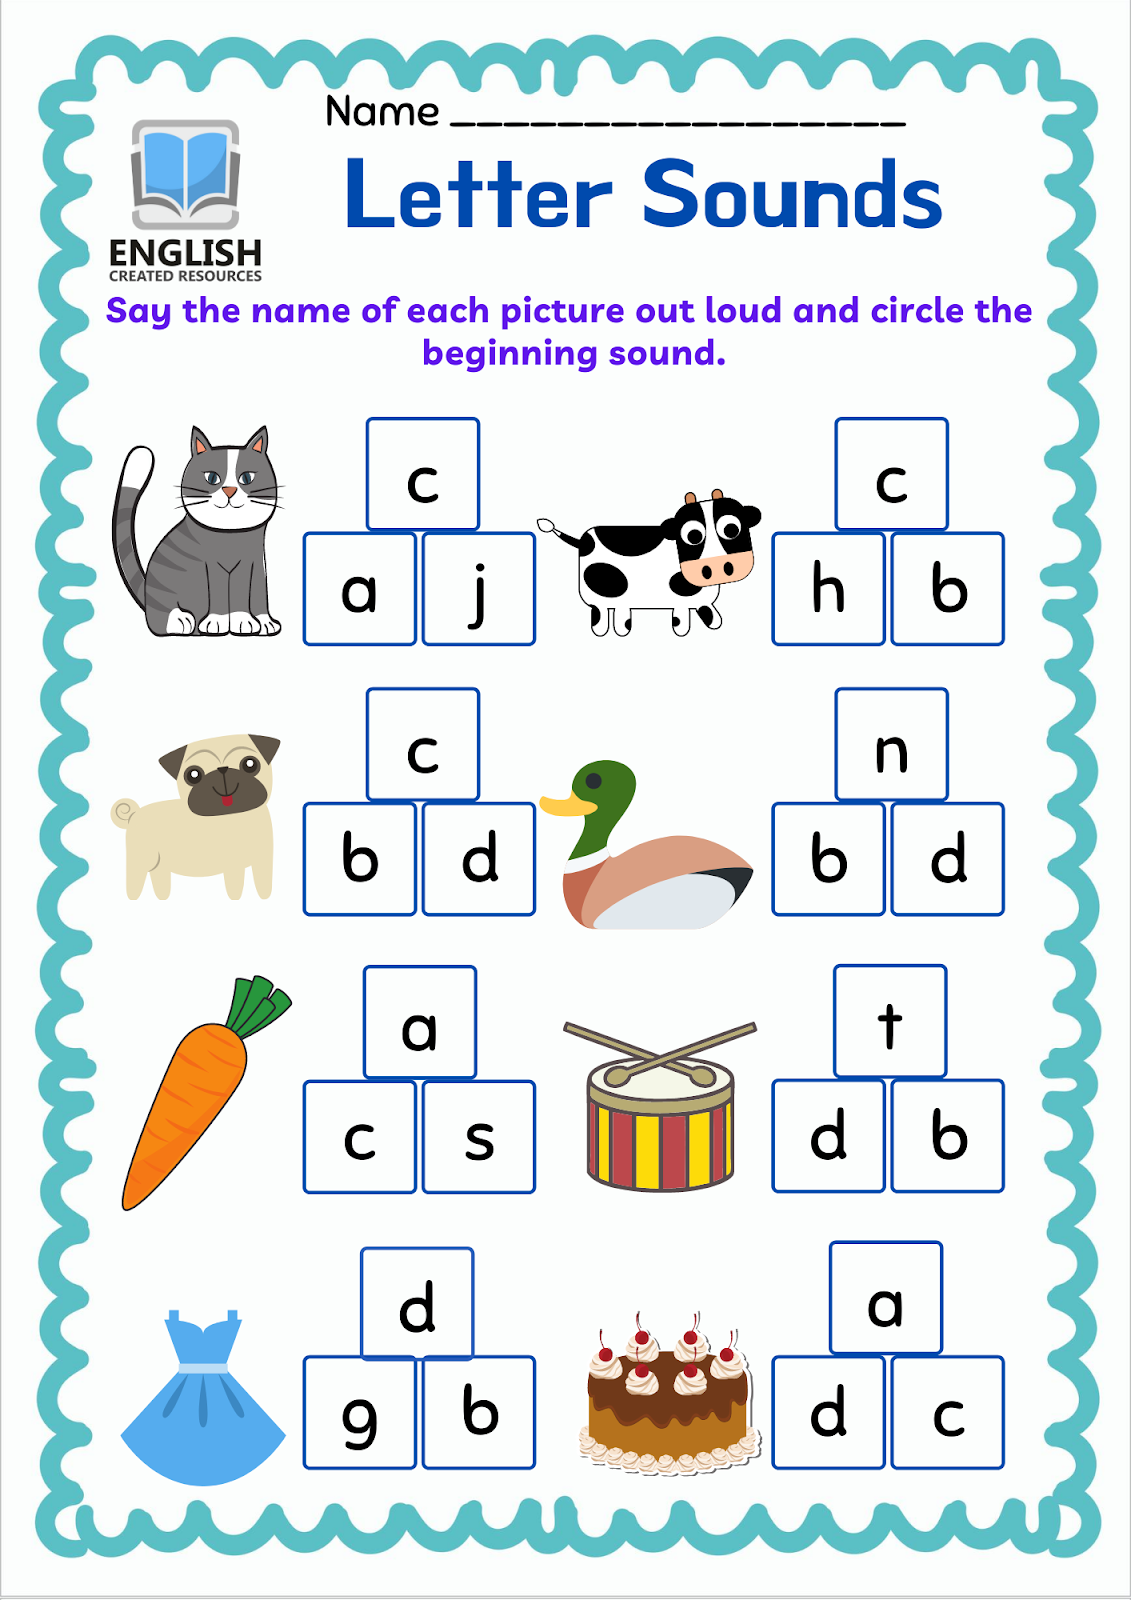 Letter Sounds Worksheets - English Created Resources